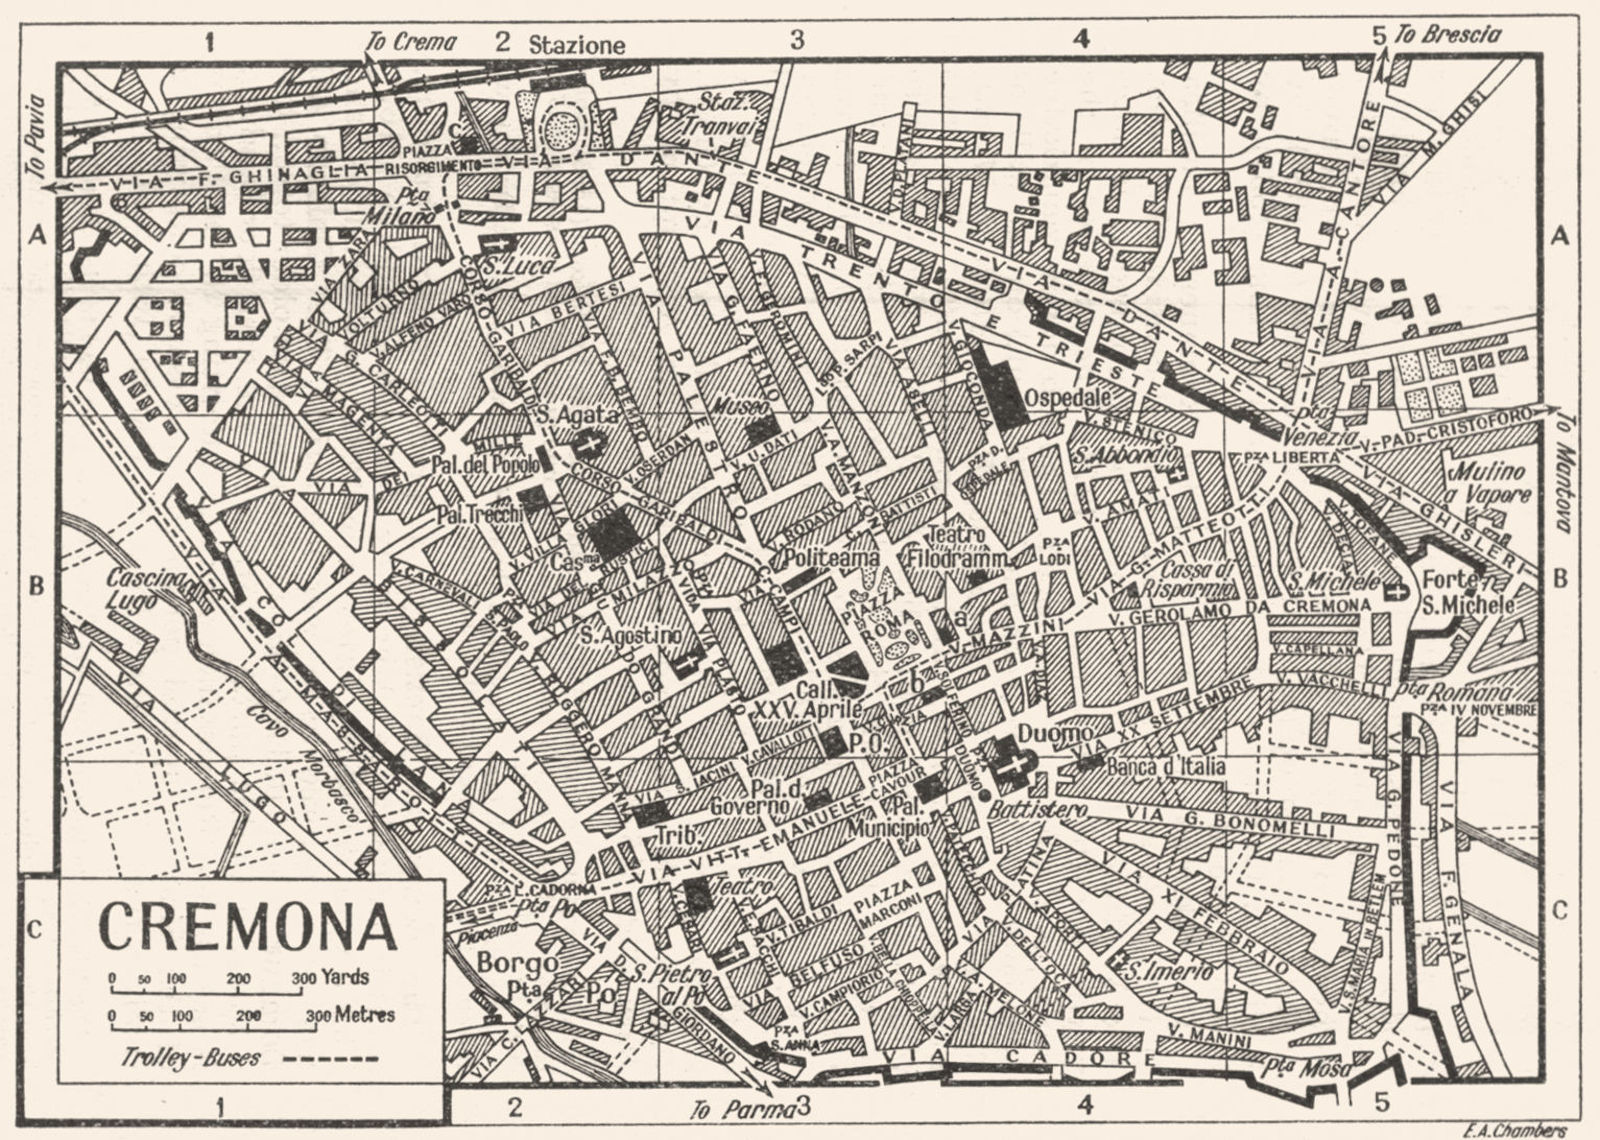 Associate Product CREMONA town/city plan. Italy 1953 old vintage map chart